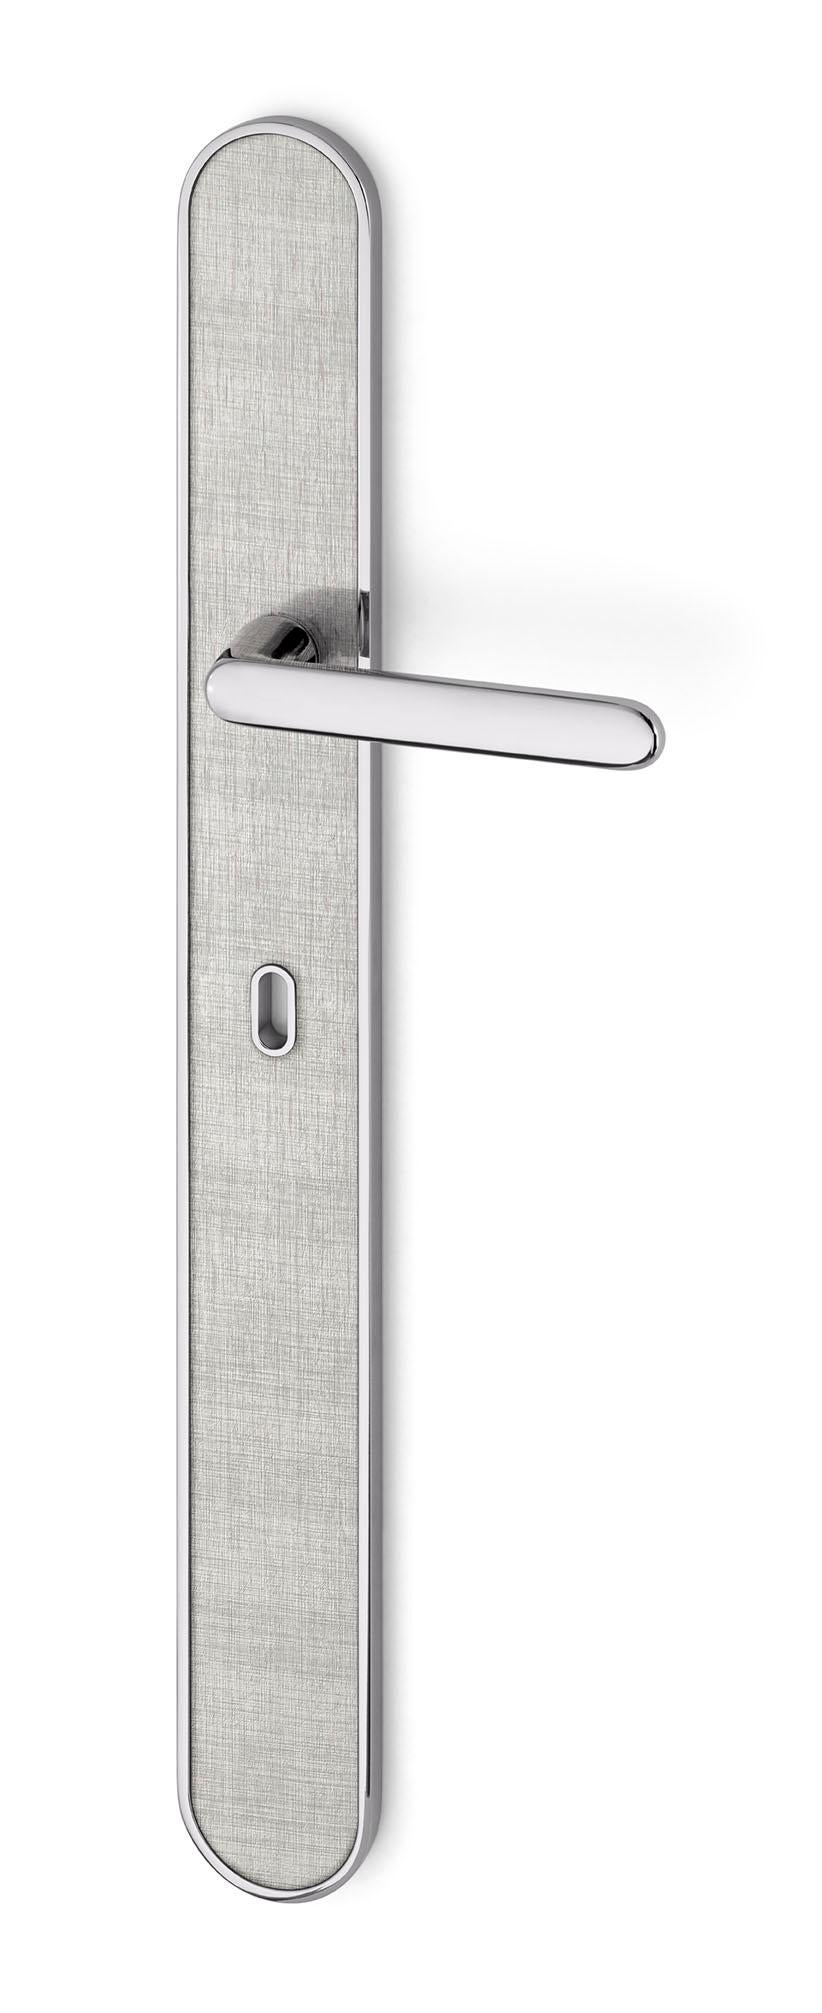 Modern Door Handle Aluminum Plate Brass Handle Body Polished Chrome Finished Vetrite For Sale